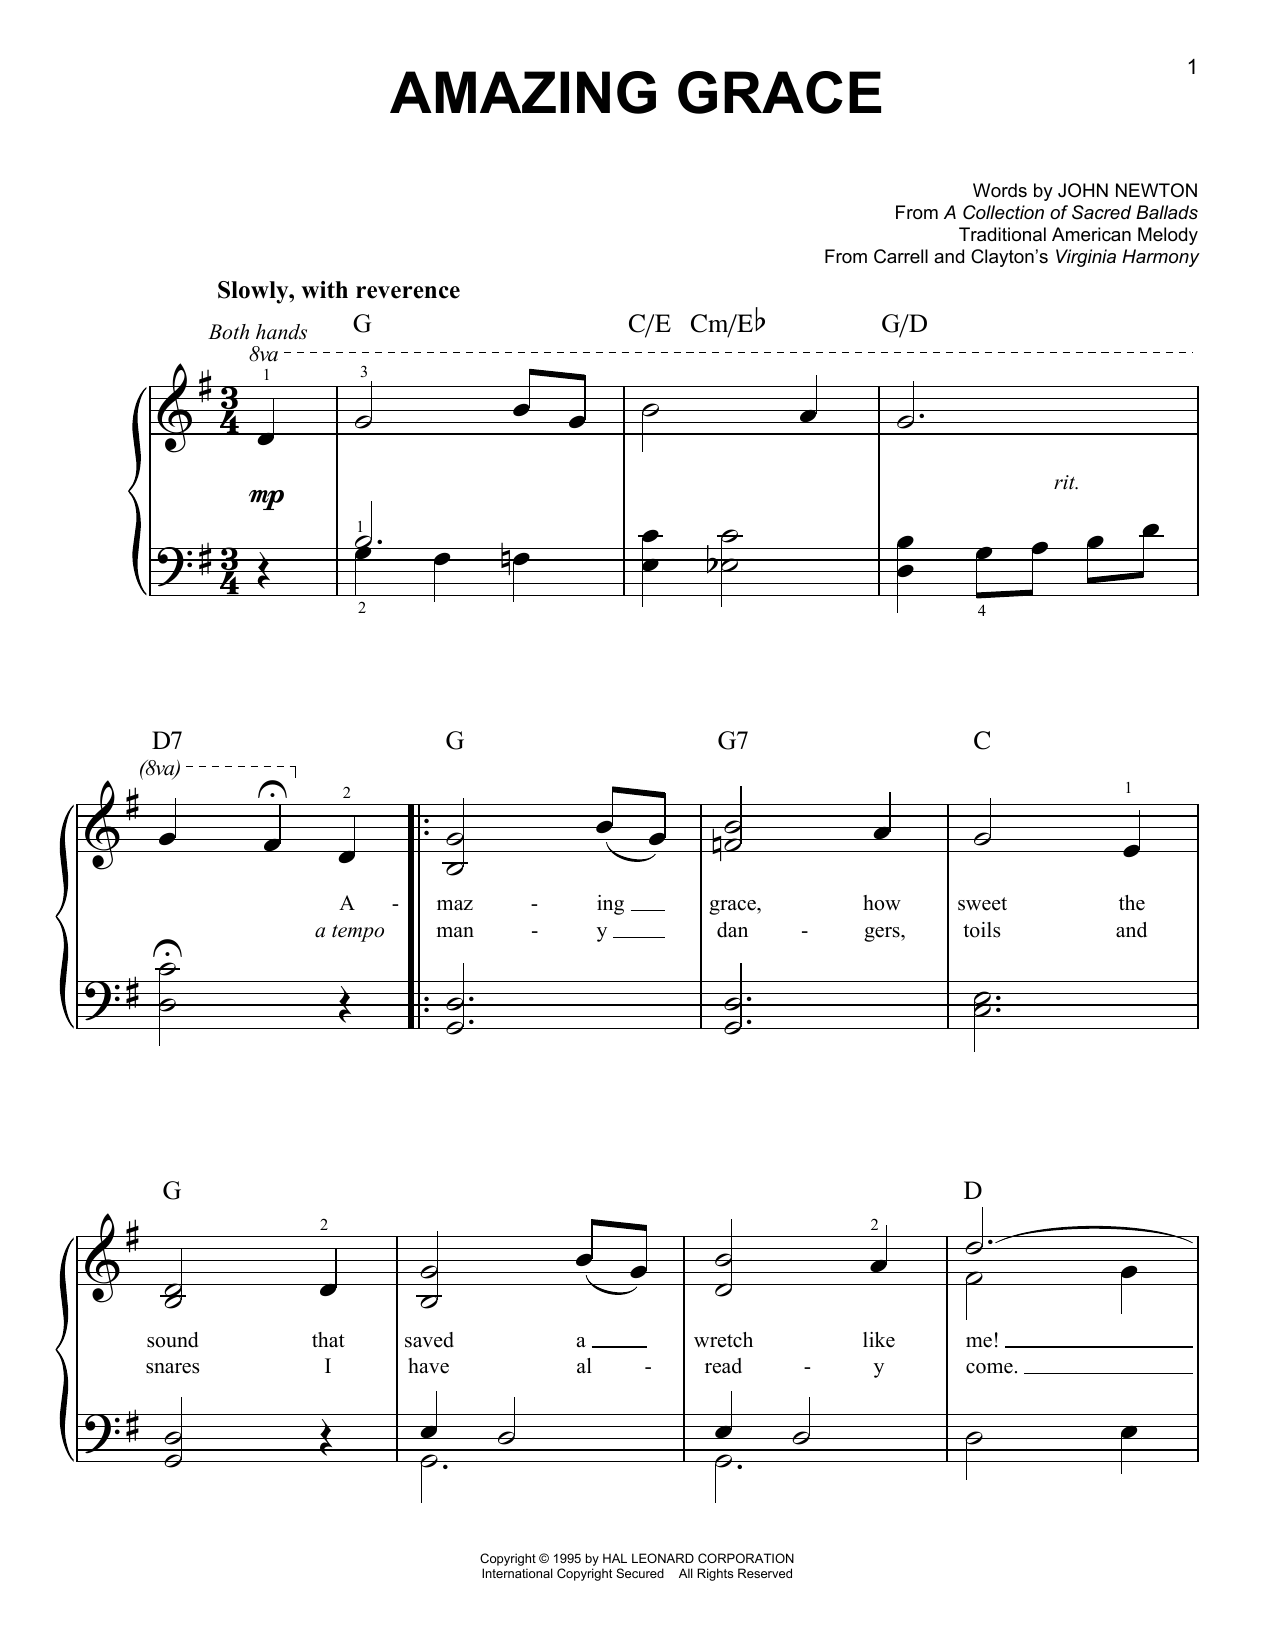 Traditional American Melody Amazing Grace sheet music notes printable PDF score